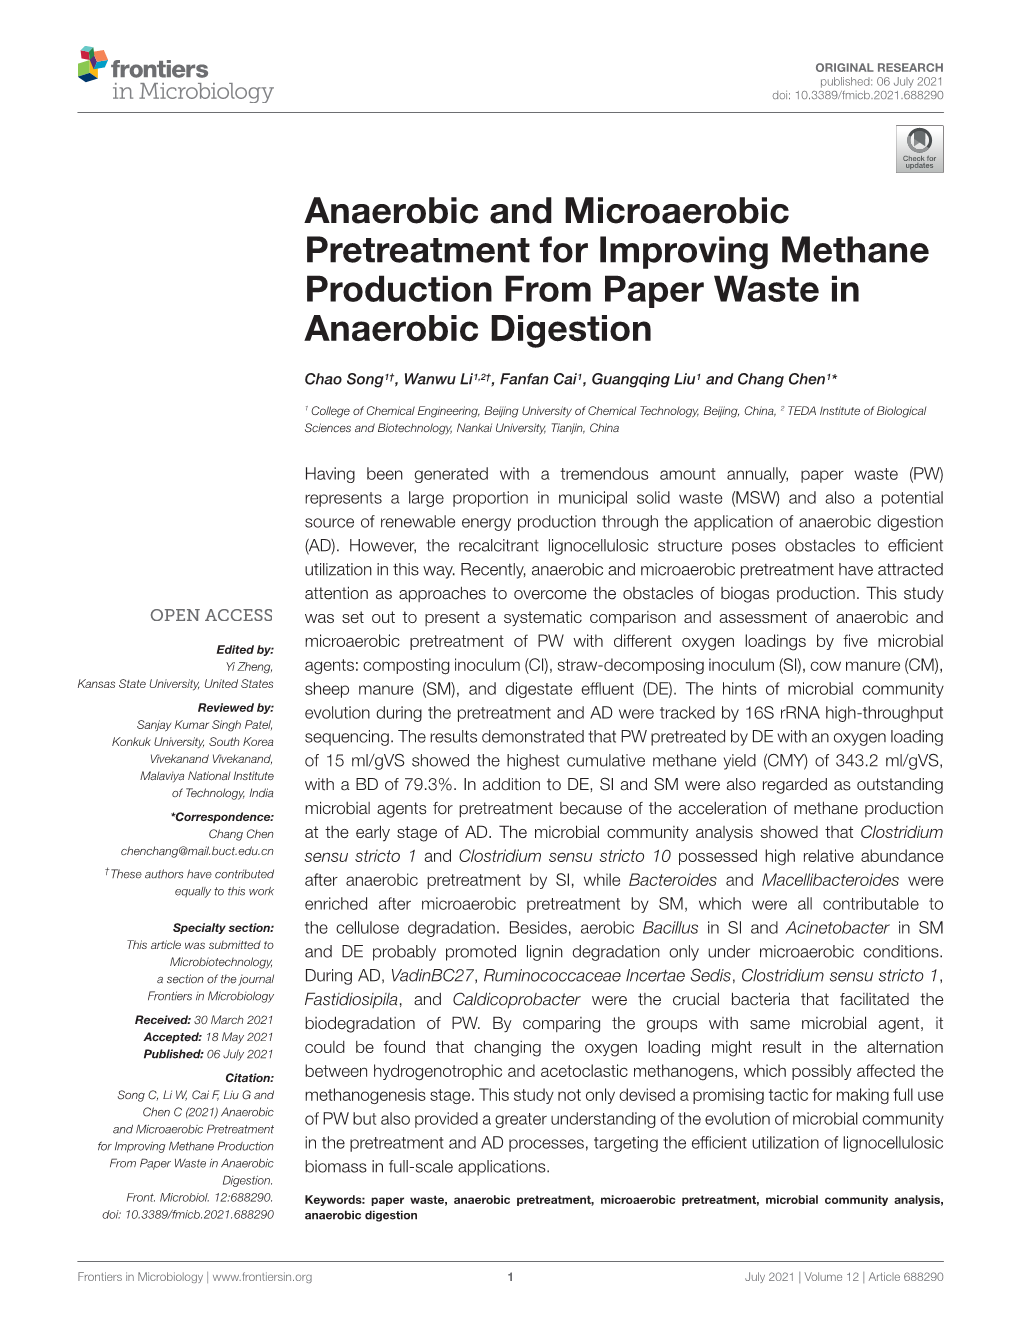 Anaerobic and Microaerobic Pretreatment for Improving Methane Production from Paper Waste in Anaerobic Digestion